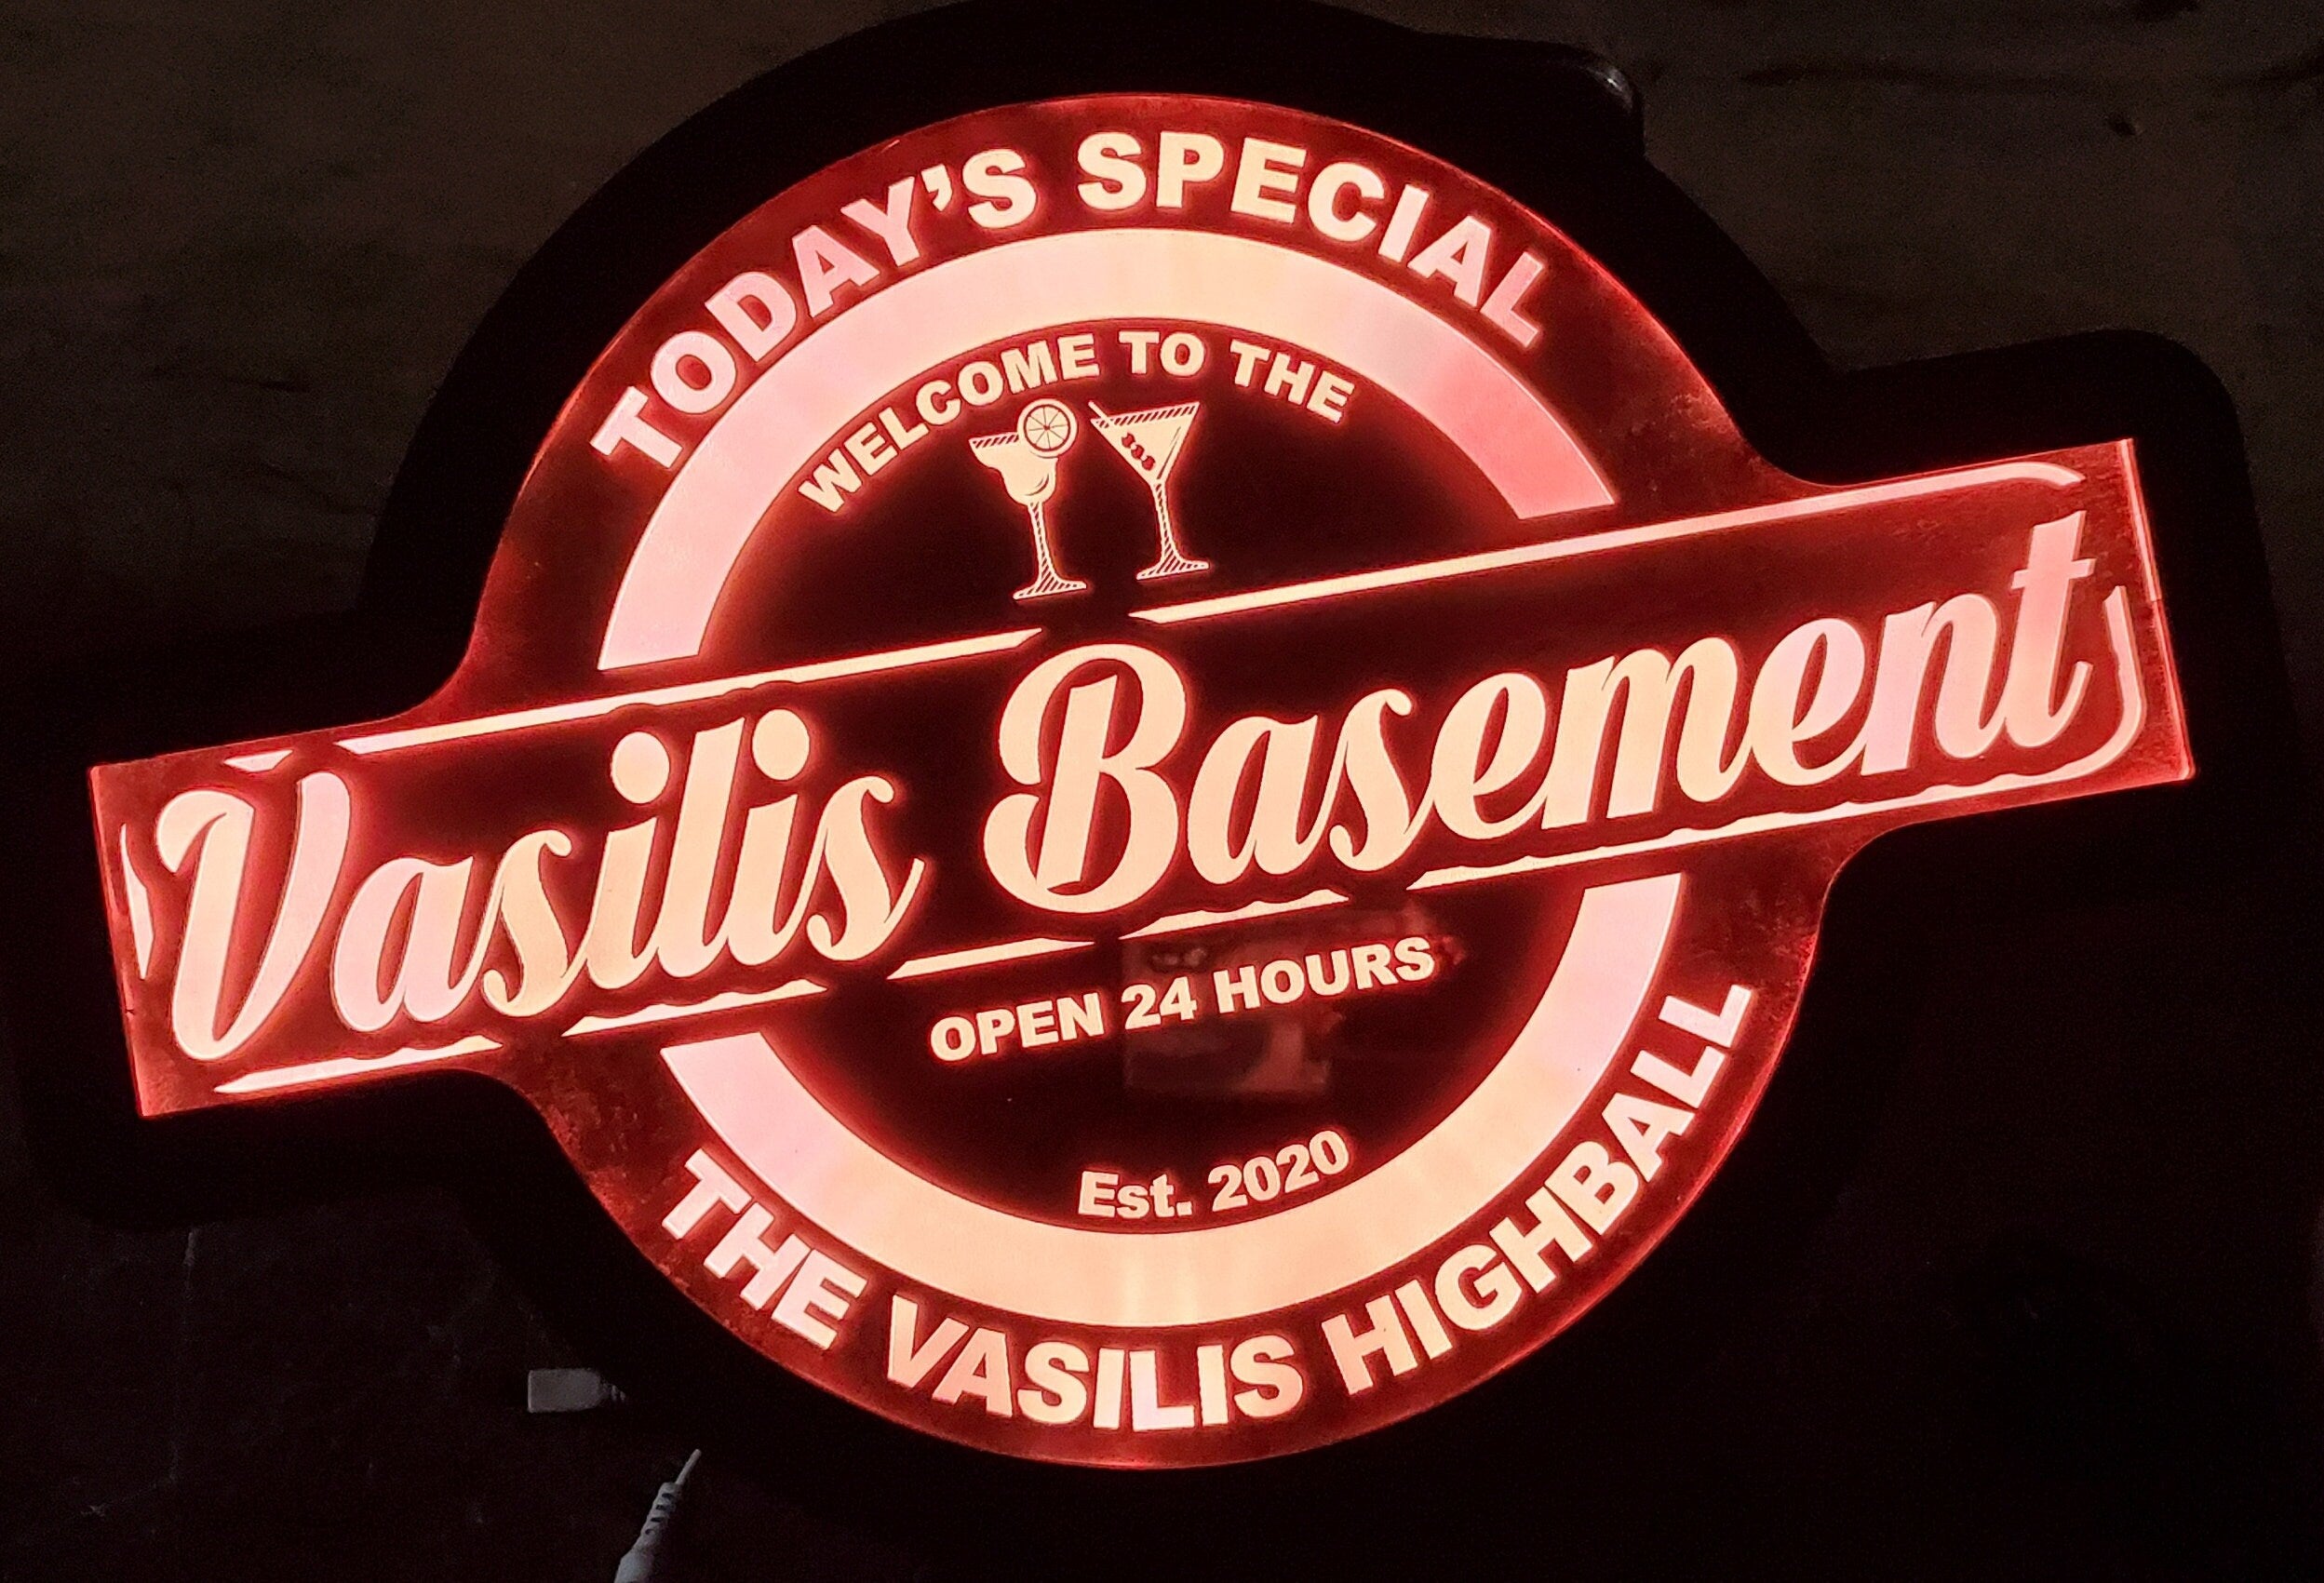 Custom Basement Bar Cave Man Led Wall Sign Neon Like - Color Changing Remote Control - 4 Sizes Free Shipping